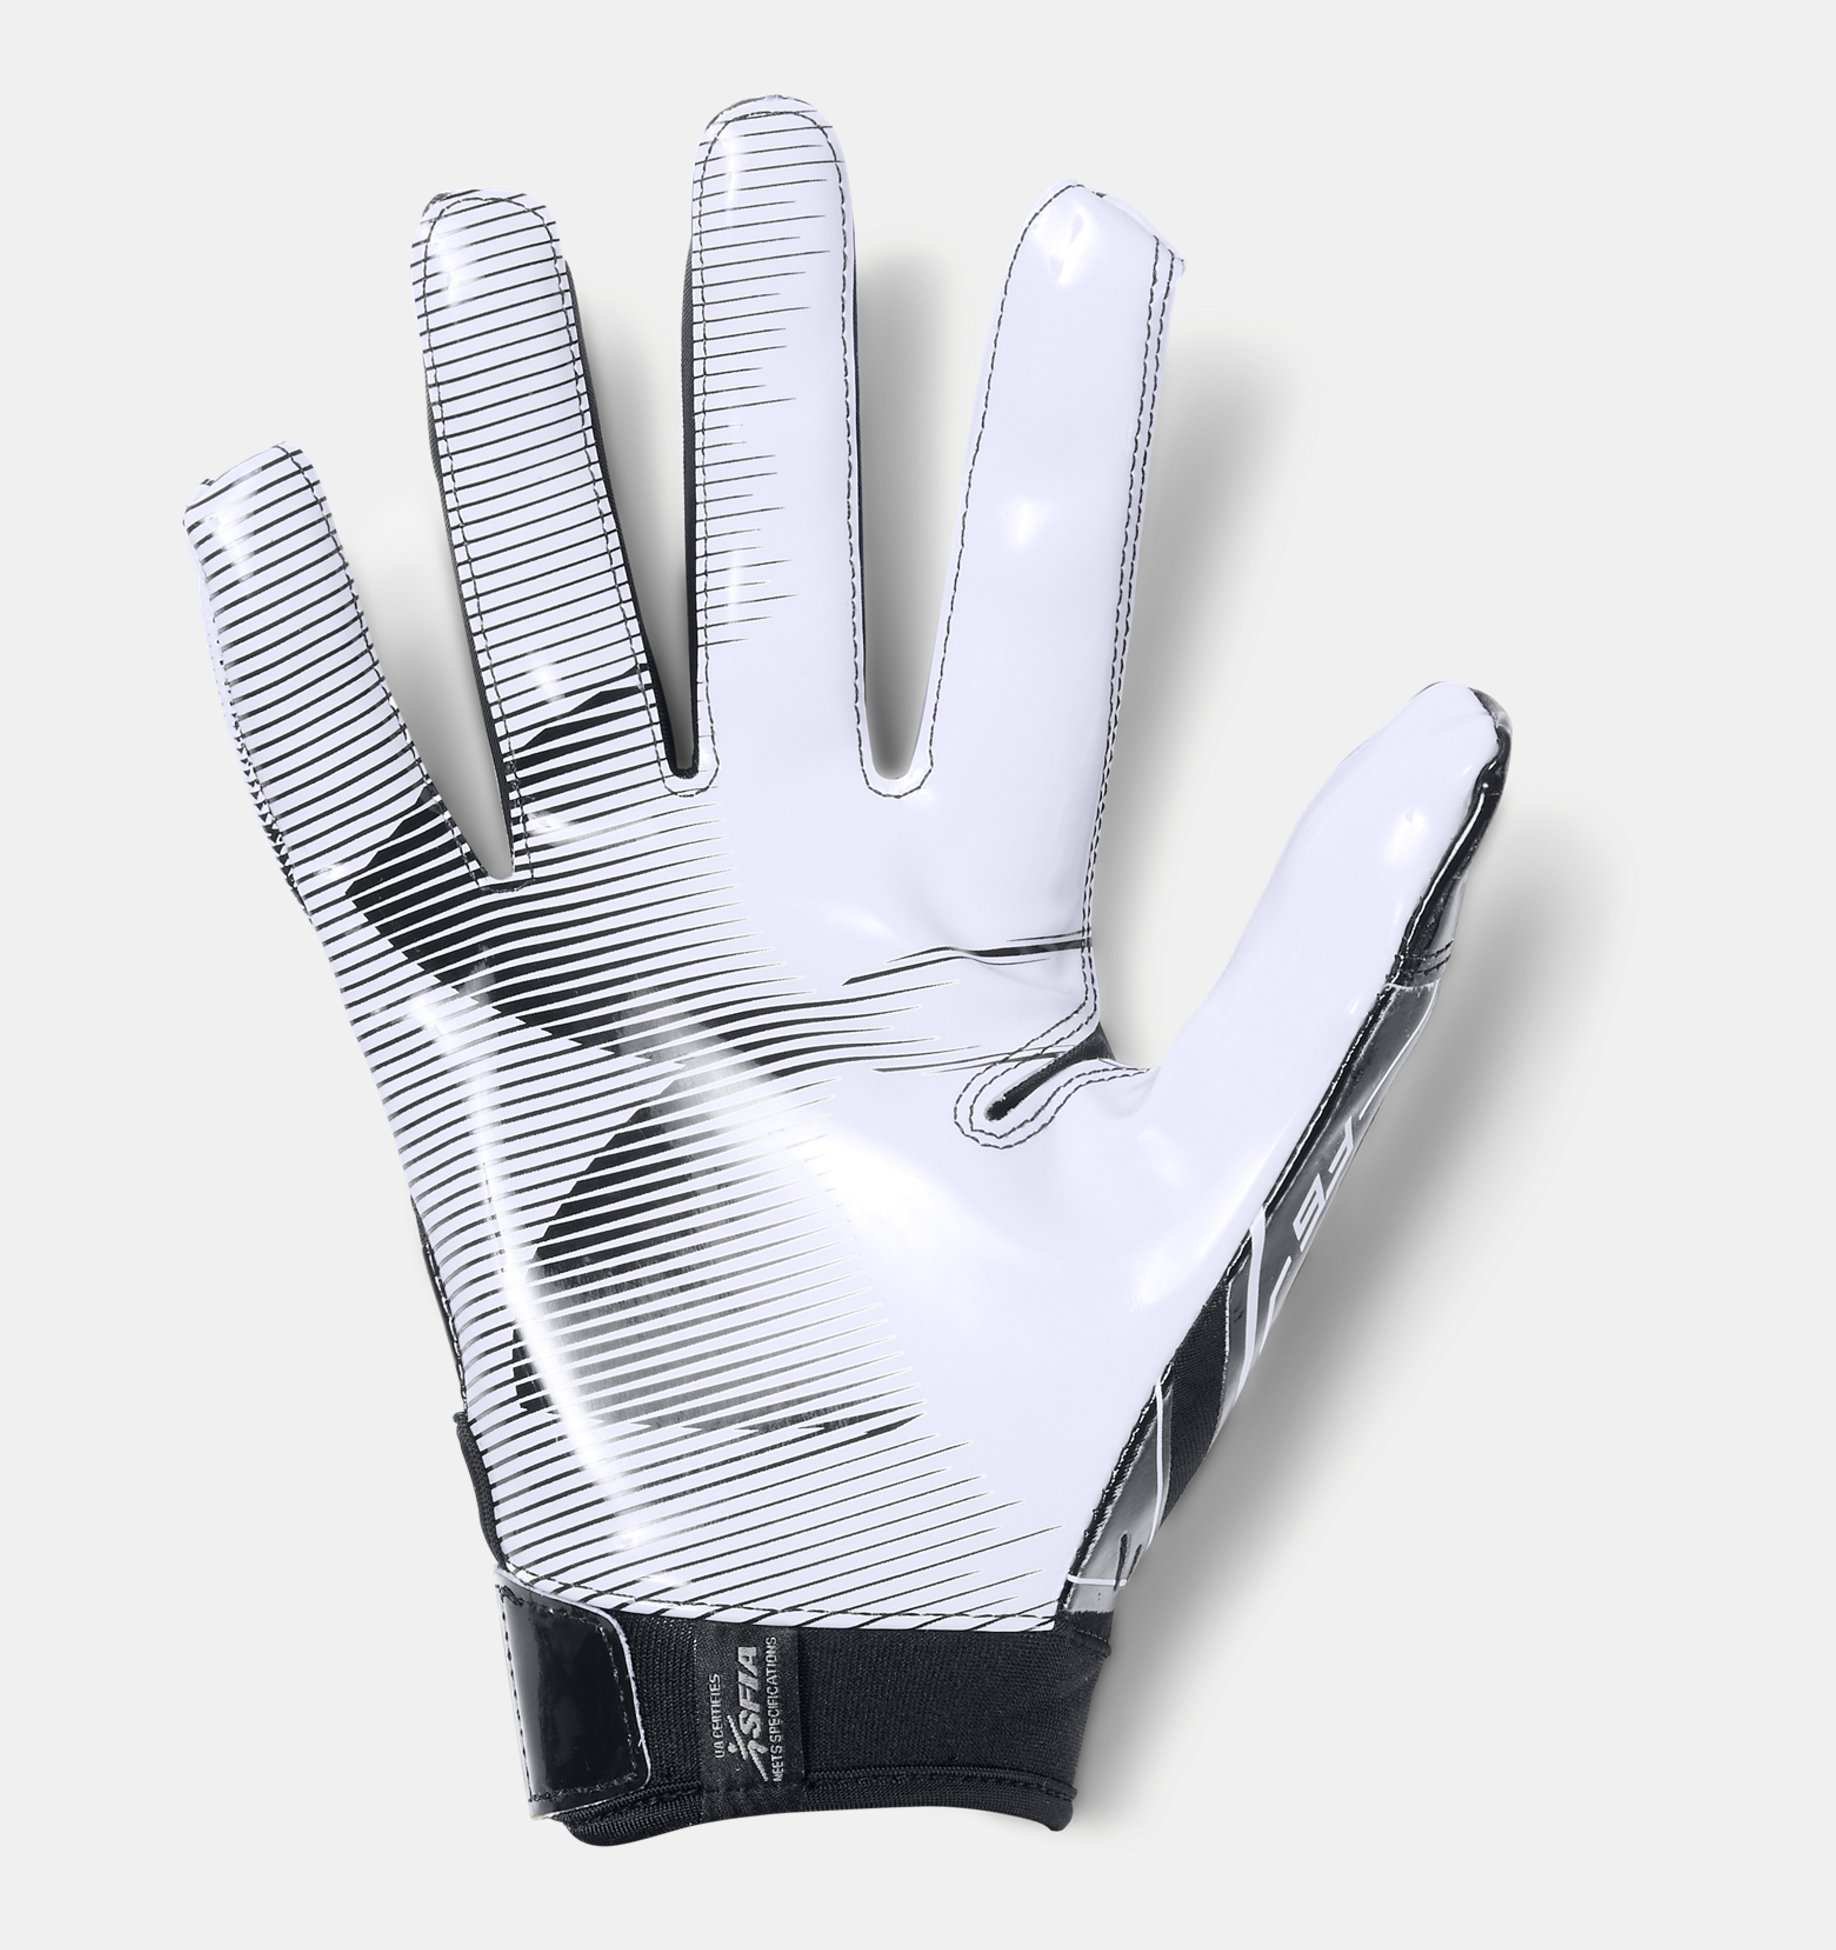 Under Armour UA F6 ADULT Football Gloves **BRAND NEW SHIPS FREE** Black White 